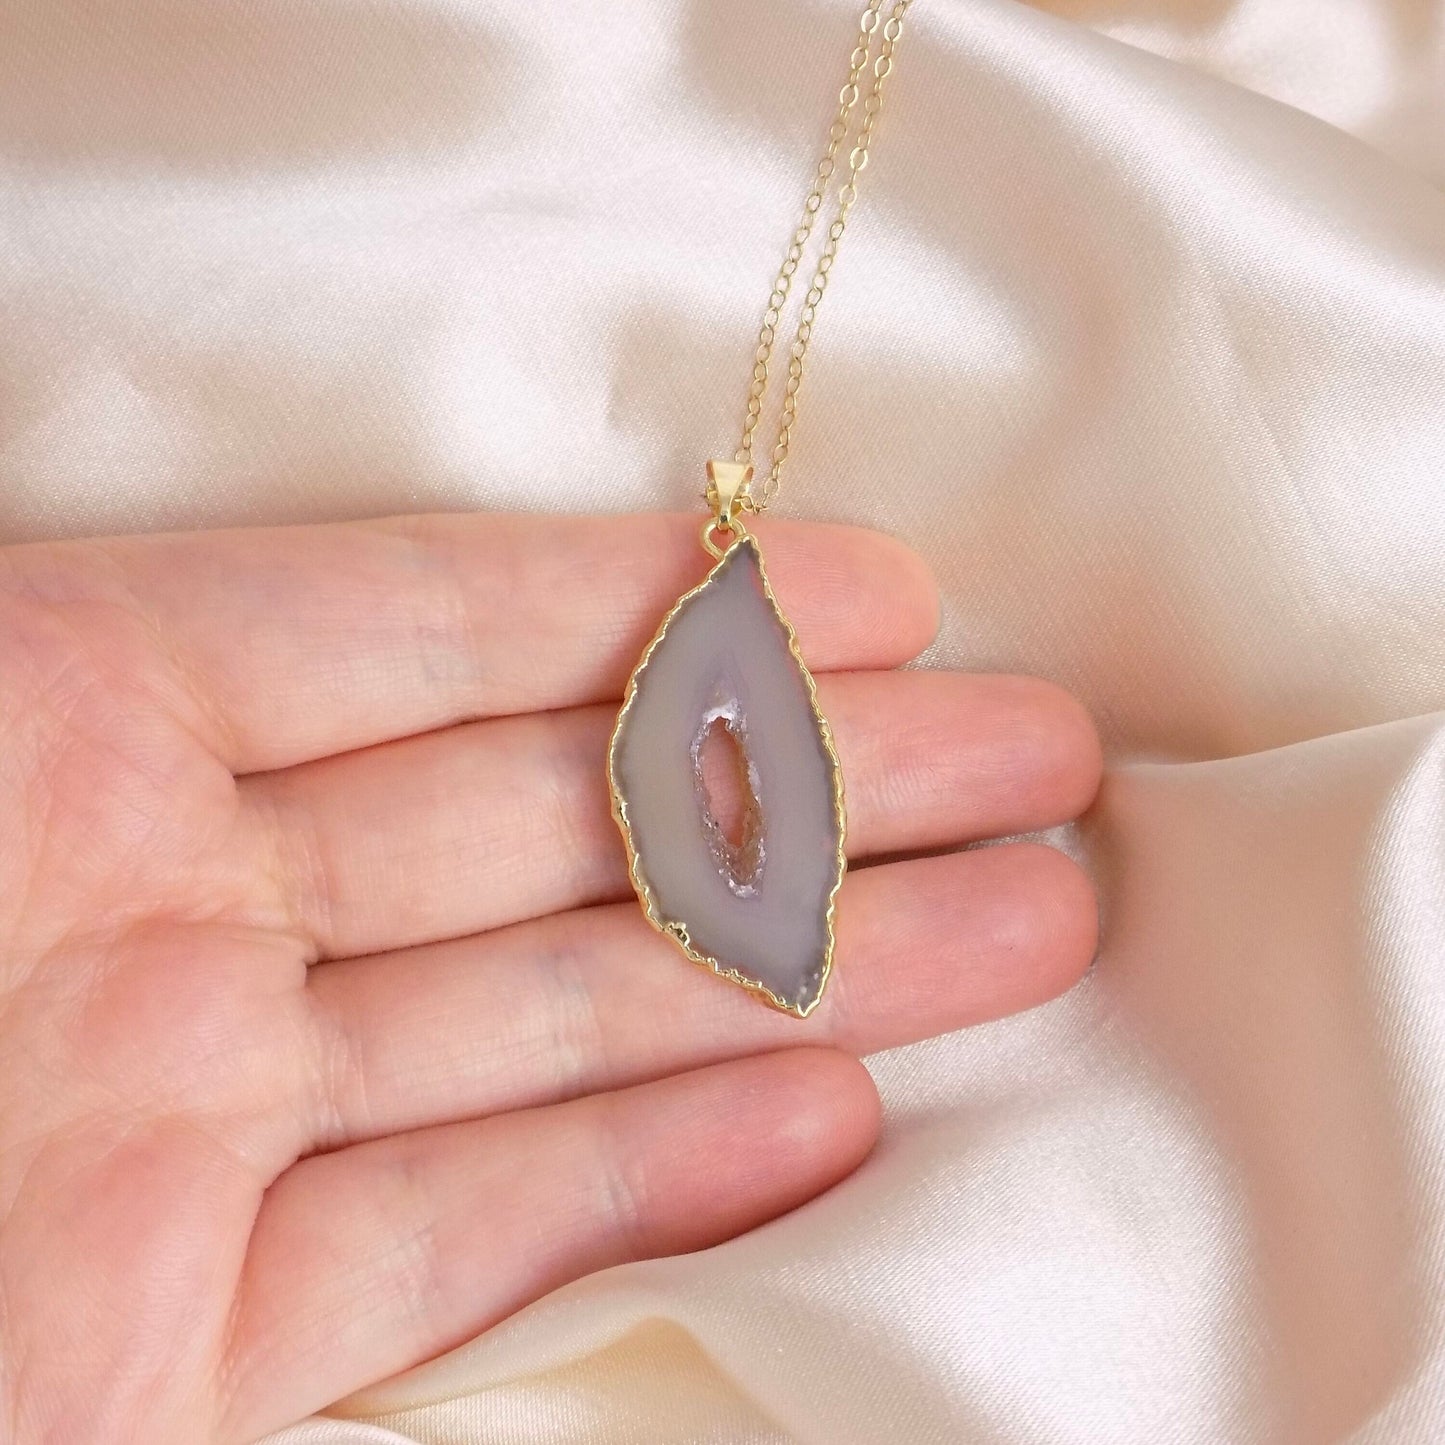 Unique Geode Necklace Gold, Small Druzy Necklace, Boho Gemstone Layering, Christmas Gift For Friend, G14-841